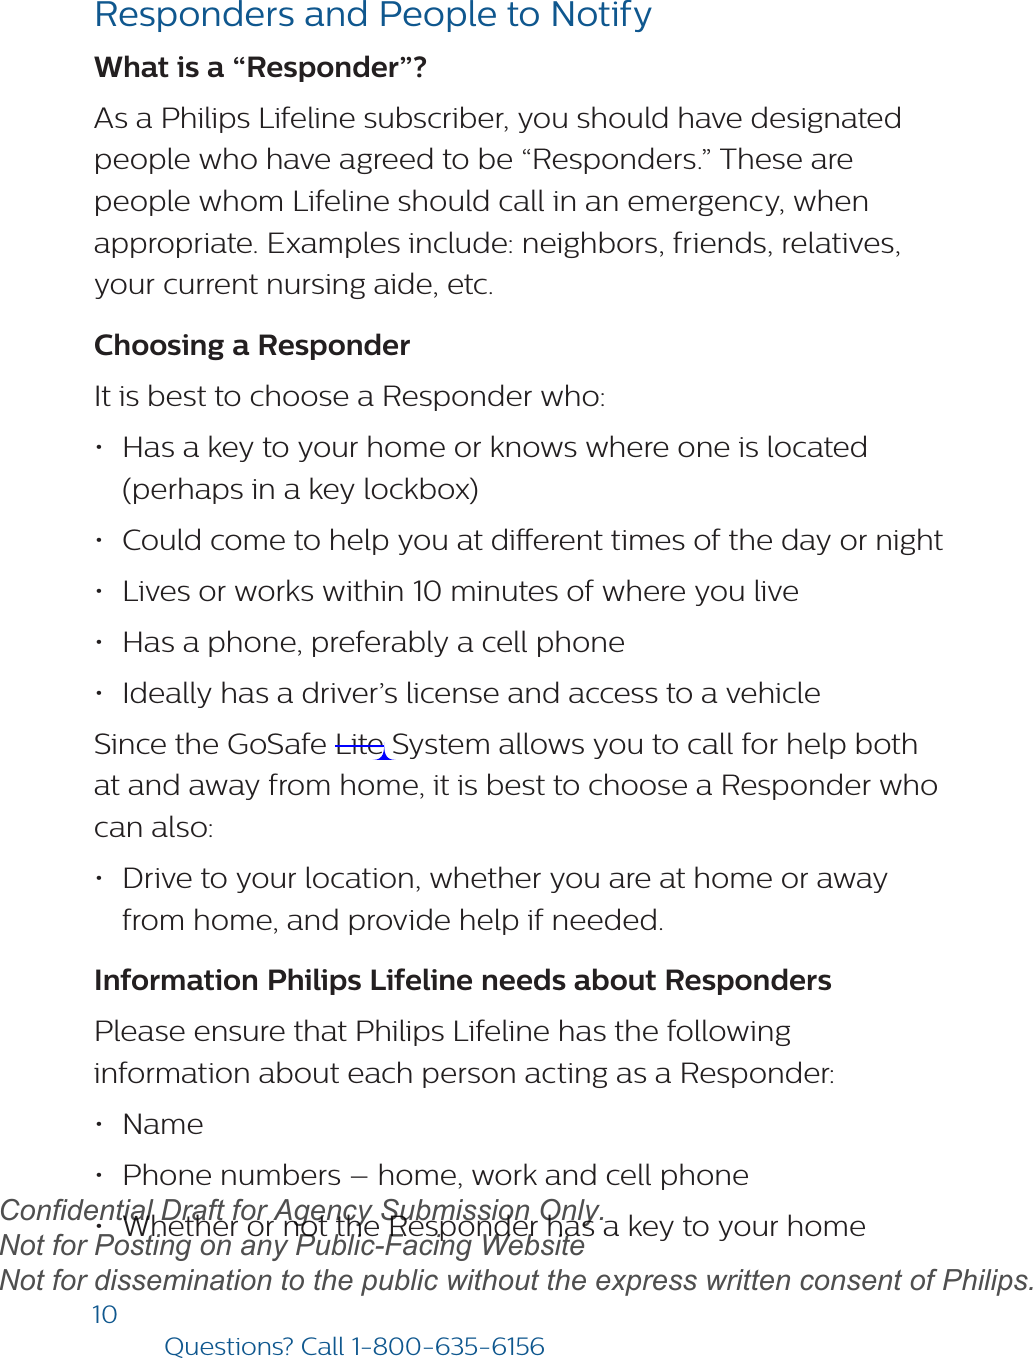 10Questions? Call1-800-635-6156Responders and People to NotifyWhat is a “Responder”? As a Philips Lifeline subscriber, you should have designated people who have agreed to be “Responders.” These are people whom Lifeline should call in an emergency, when appropriate. Examples include: neighbors, friends, relatives, your current nursing aide, etc.Choosing a Responder It is best to choose a Responder who:•Has a key to your home or knows where one is located(perhaps in a key lockbox)•Could come to help you at dierent times of the day or night•Lives or works within 10 minutes of where you live•Has a phone, preferably a cell phone•Ideally has a driver’s license and access to a vehicleSince the GoSafe Lite System allows you to call for help both at and away from home, it is best to choose a Responder who can also:•Drive to your location, whether you are at home or awayfrom home, and provide help if needed.Information Philips Lifeline needs about RespondersPlease ensure that Philips Lifeline has the following information about each person acting as a Responder:•Name•Phone numbers – home, work and cell phone•Whether or not the Responder has a key to your homedraftConfidential Draft for Agency Submission Only.   Not for Posting on any Public-Facing Website Not for dissemination to the public without the express written consent of Philips.